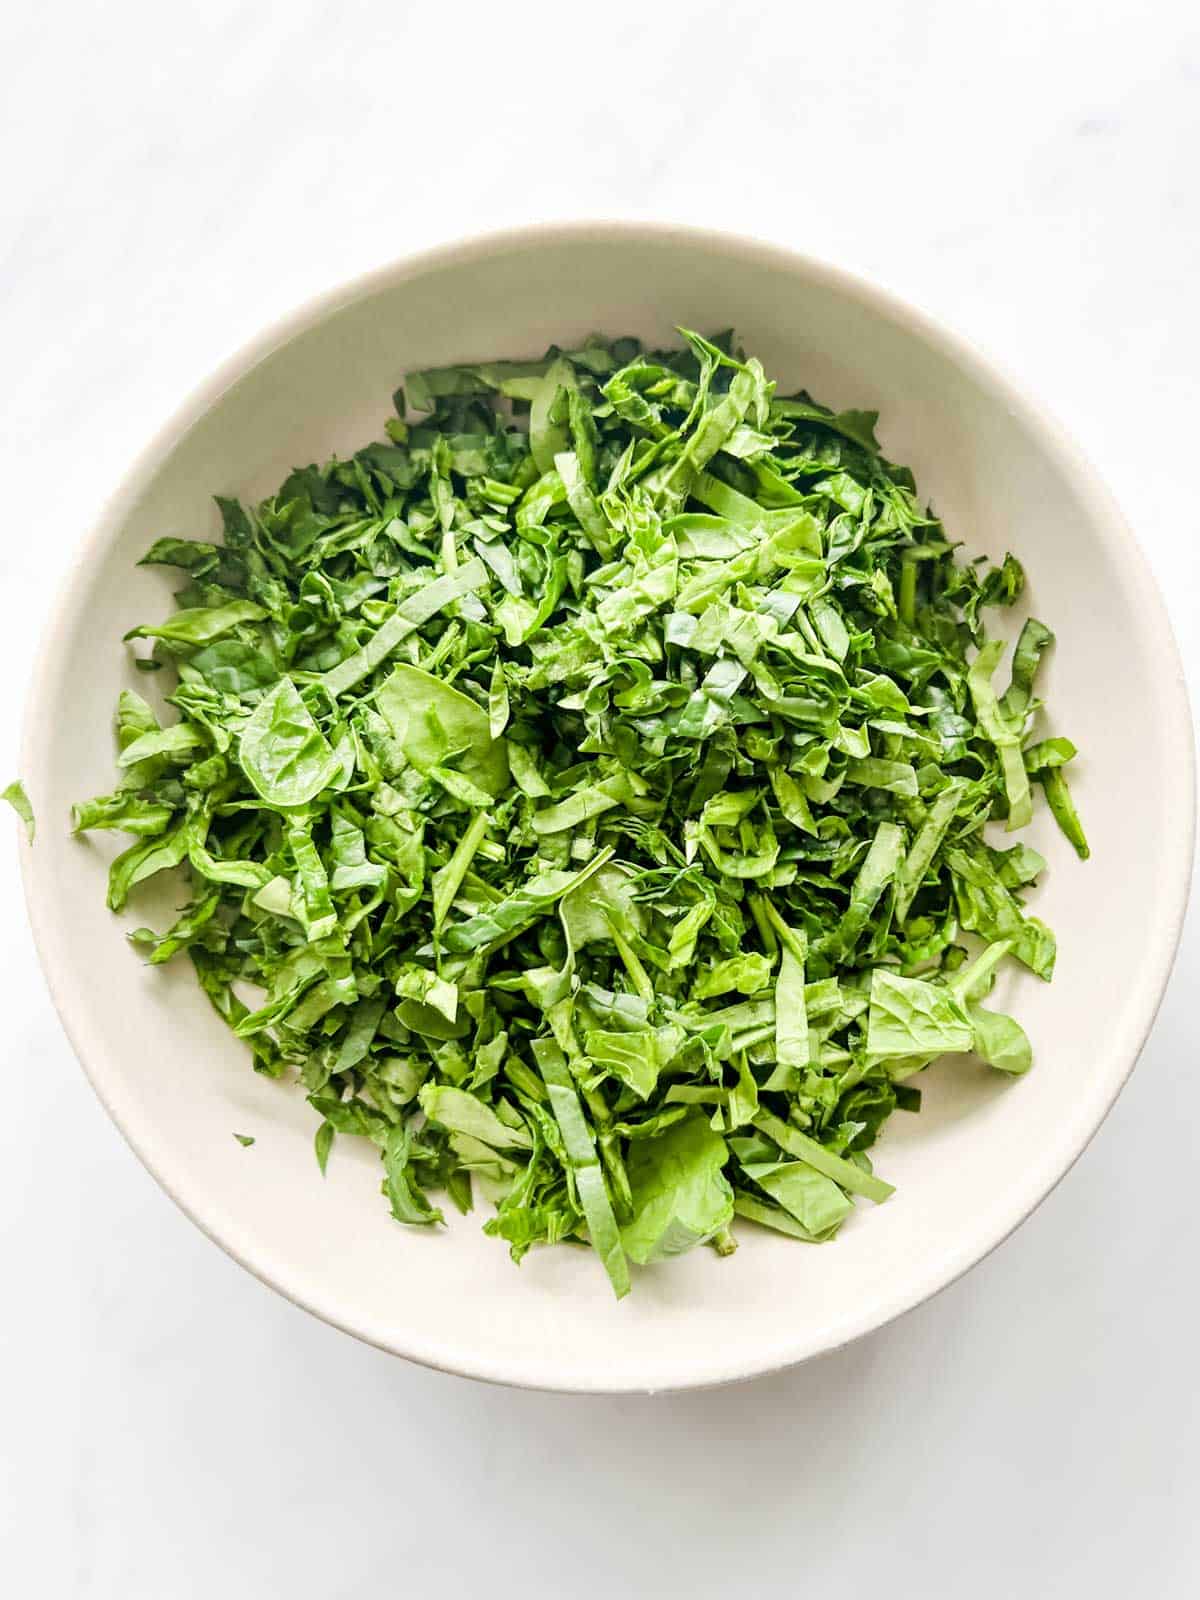 Chopped spinach in a bowl.